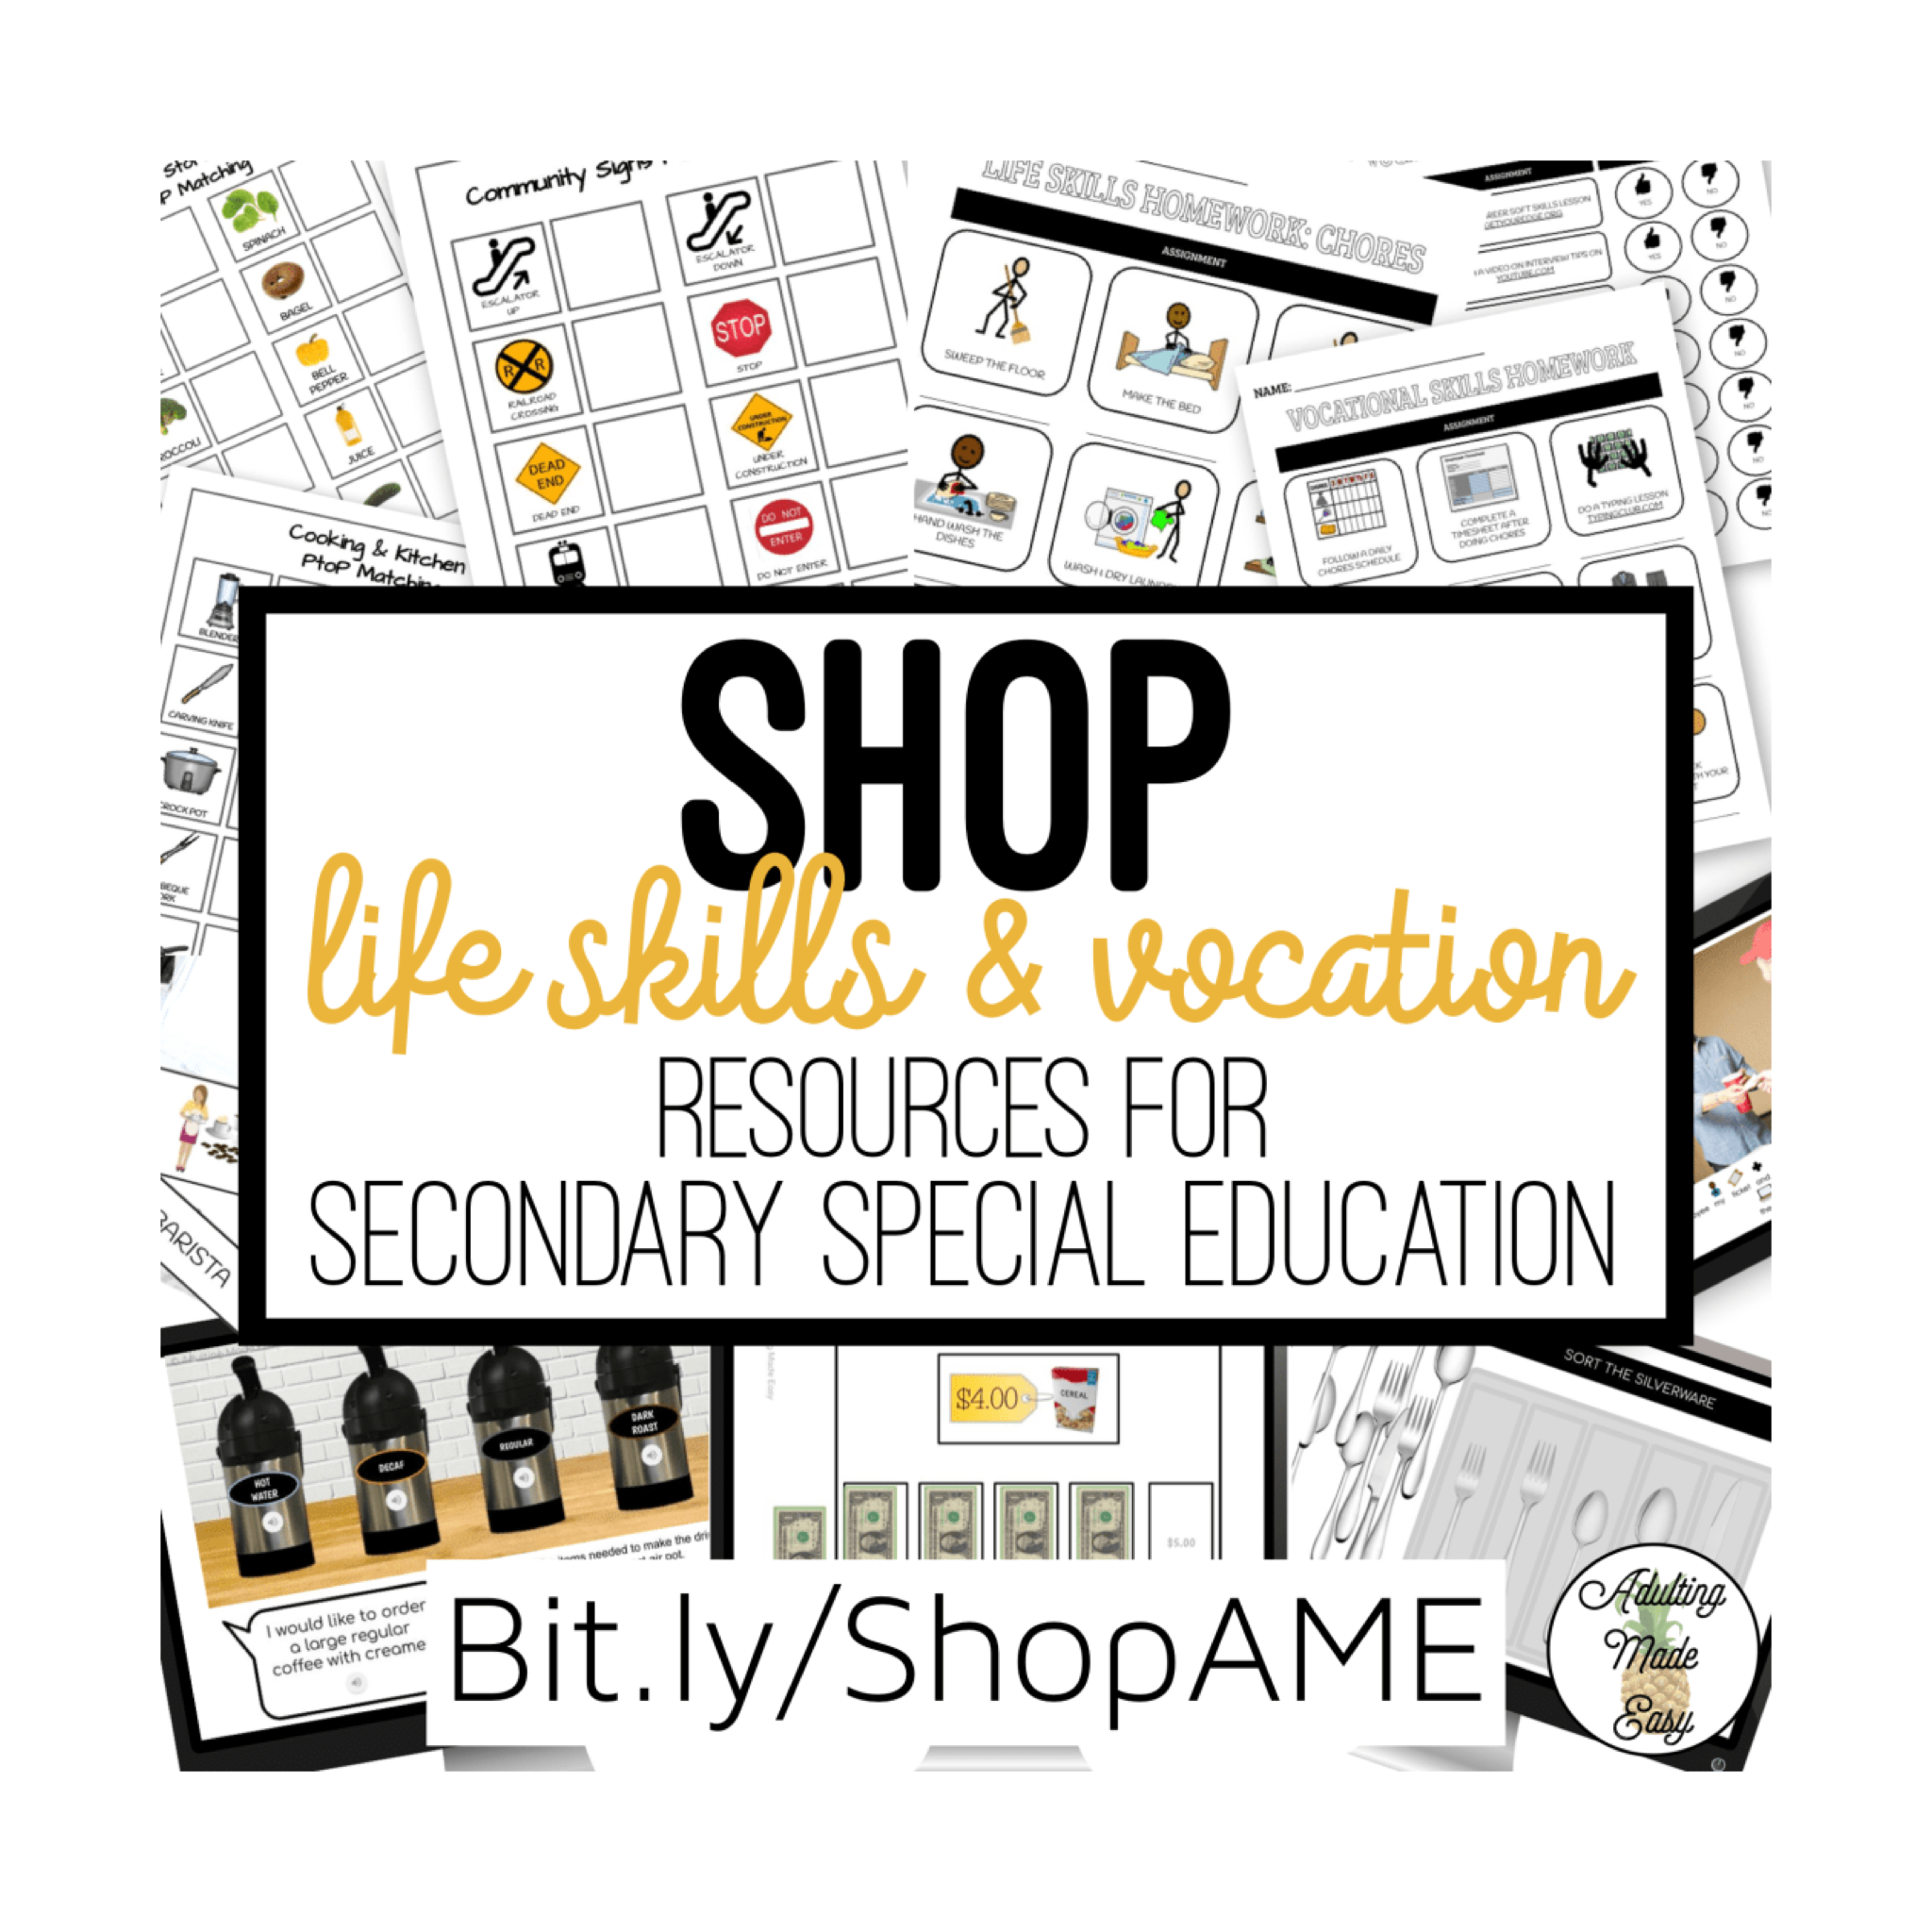 Shop Vocational & Life Skills resources for secondary special education